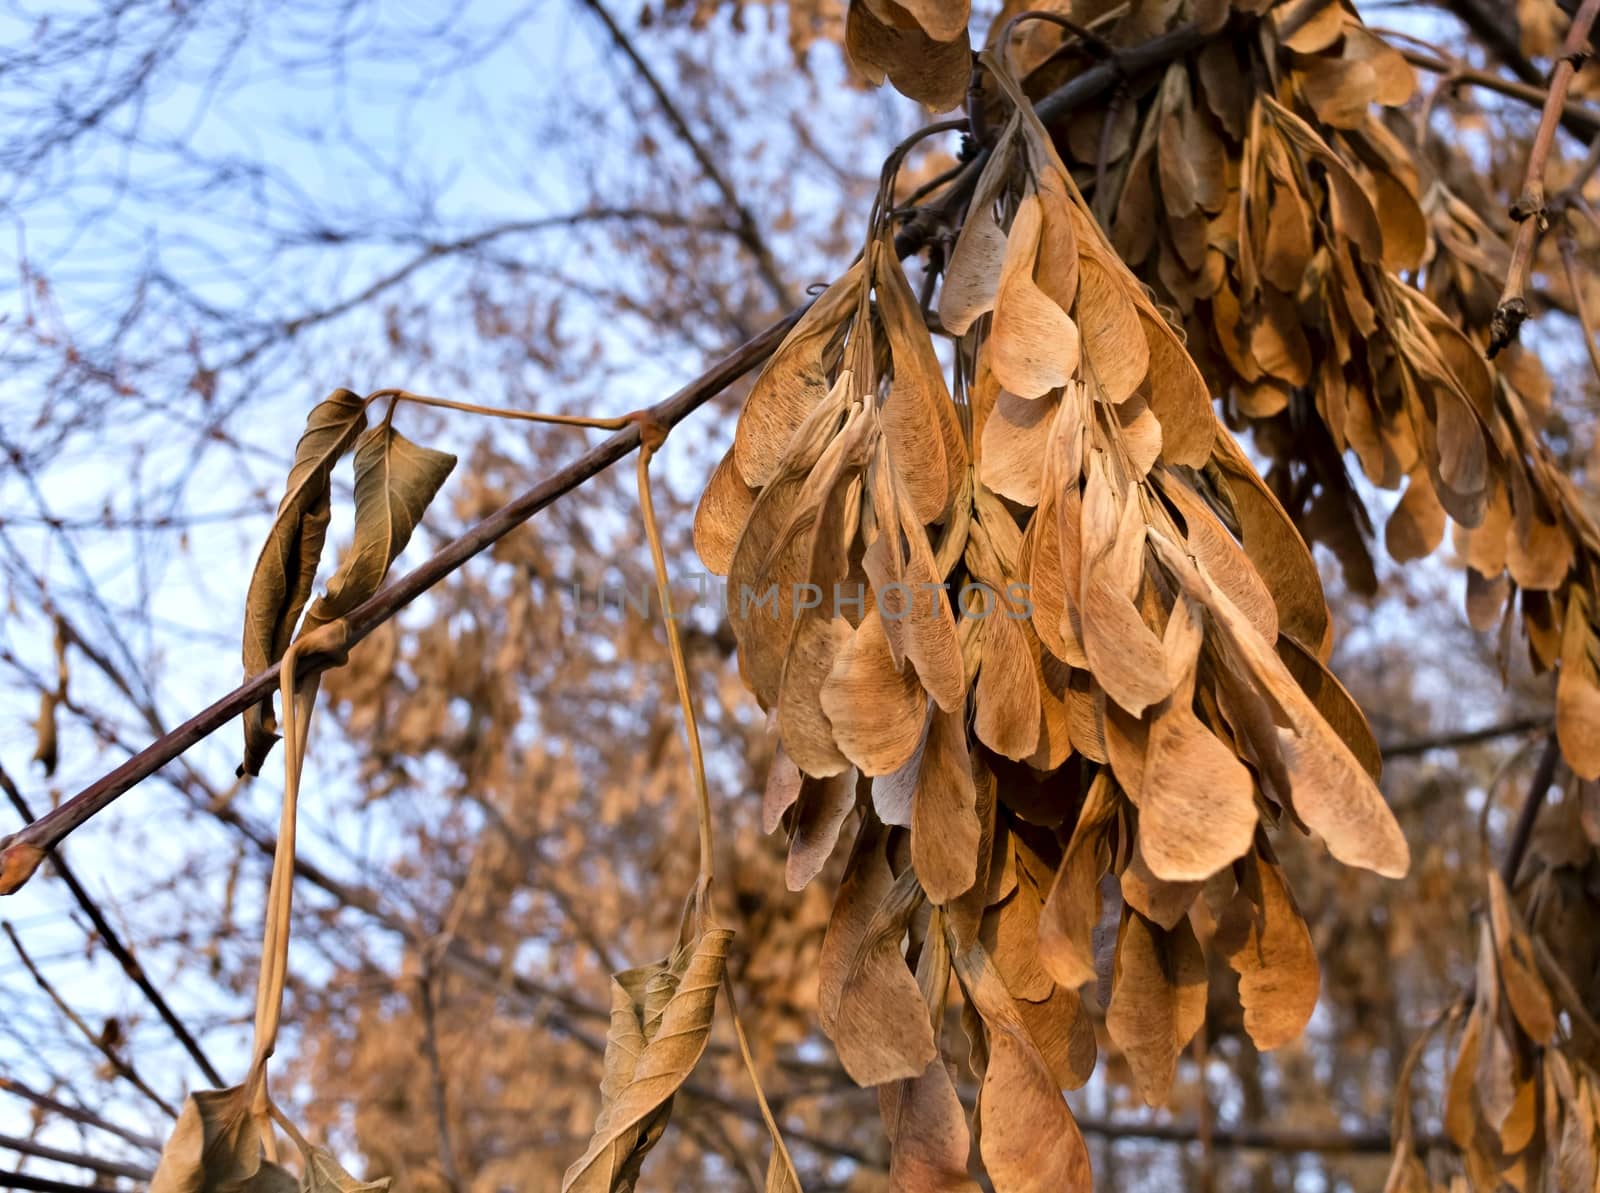 dry maple seeds on a branch in late autumn by valerypetr